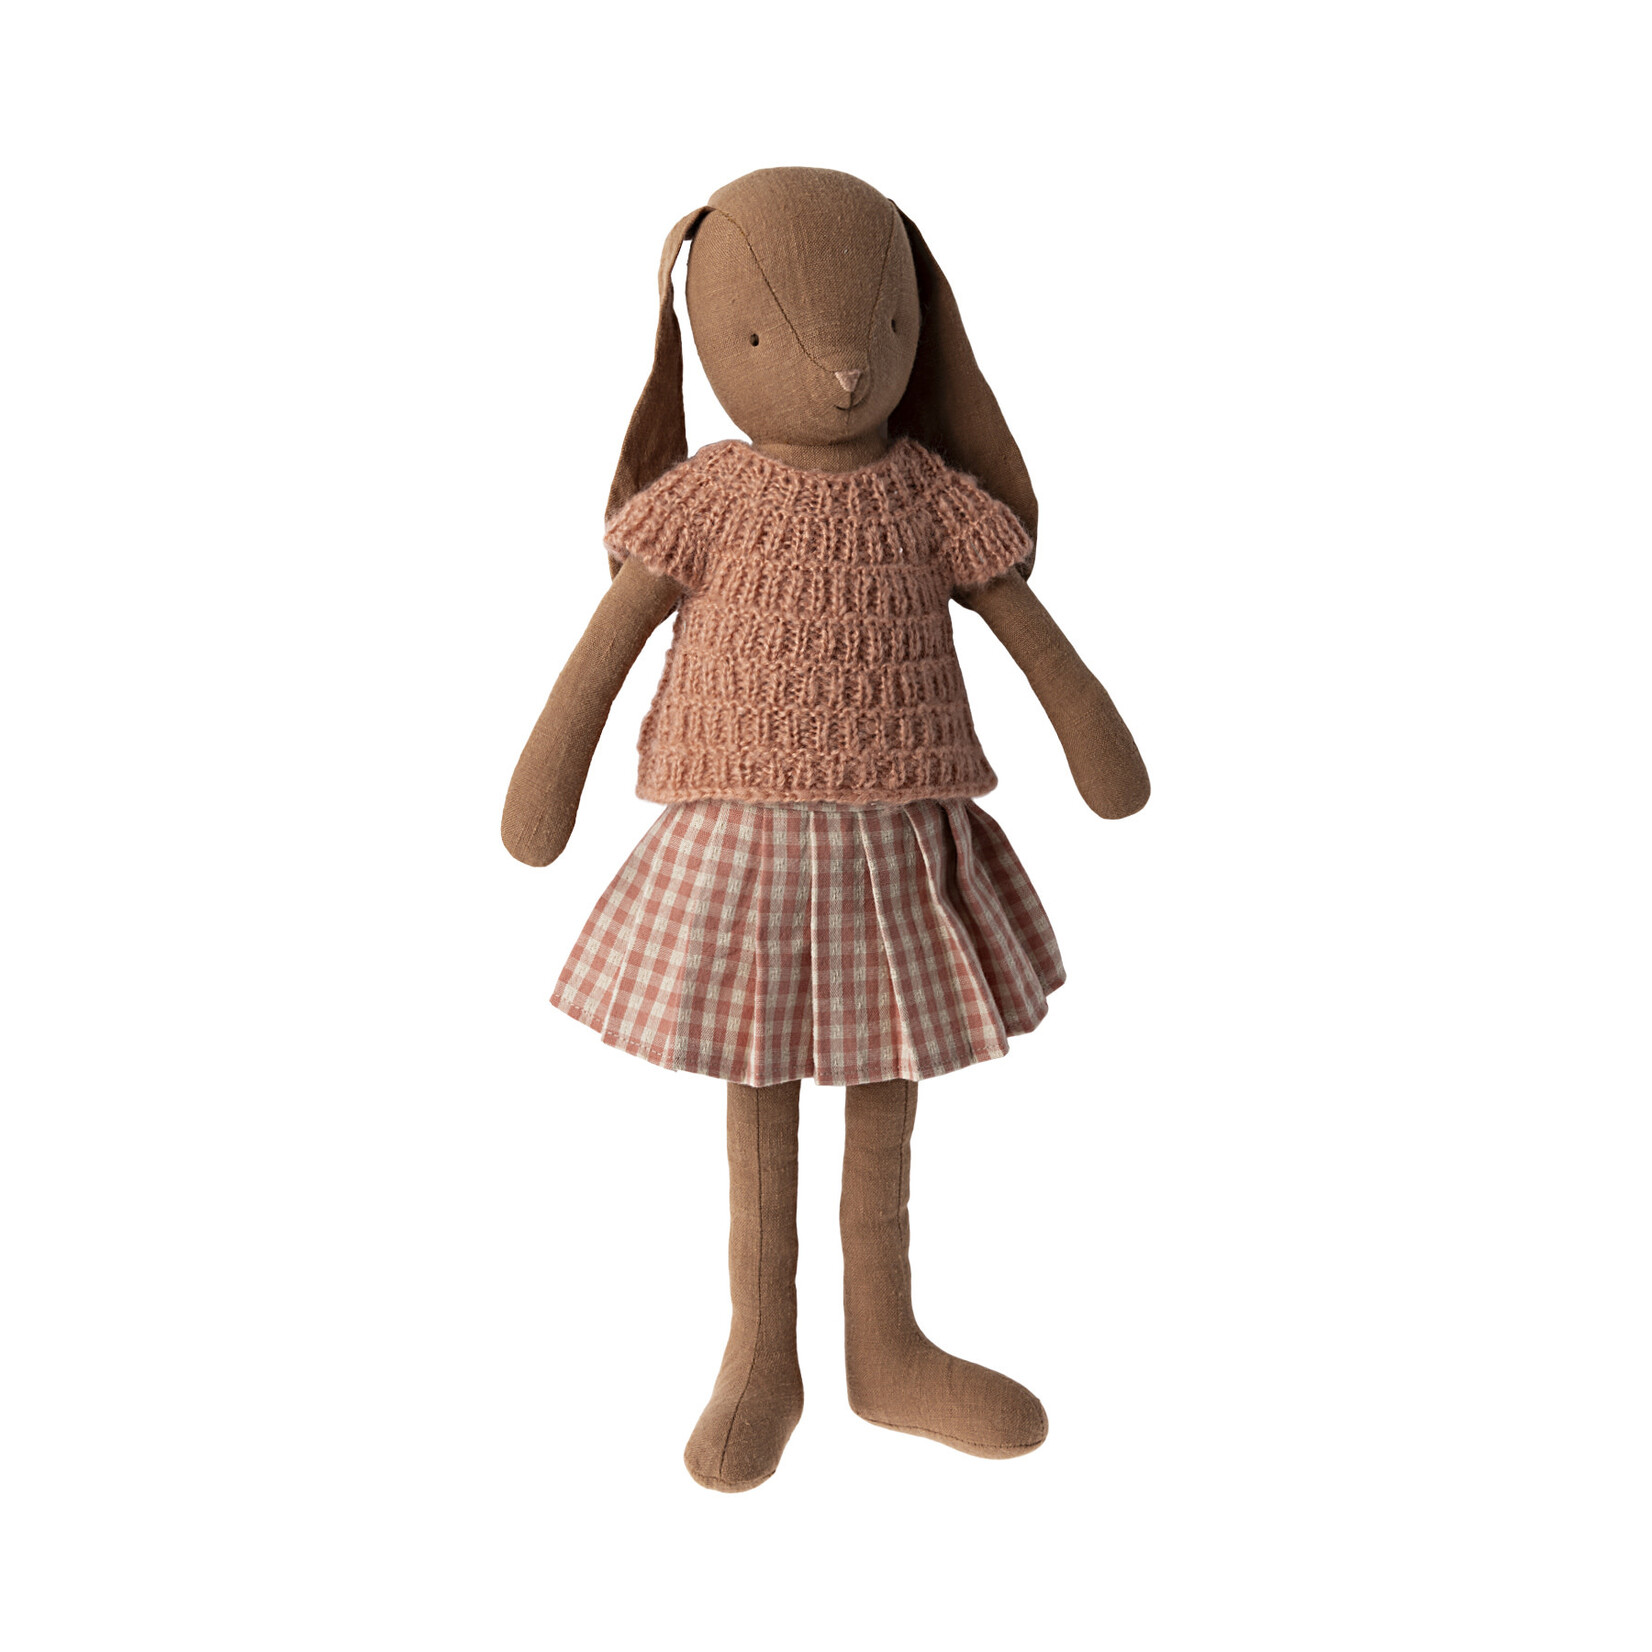 Maileg PRE ORDER Maileg Bunny size 3 Chocolate brown Knitted shirt and skirt - Estimated arrival beginning June